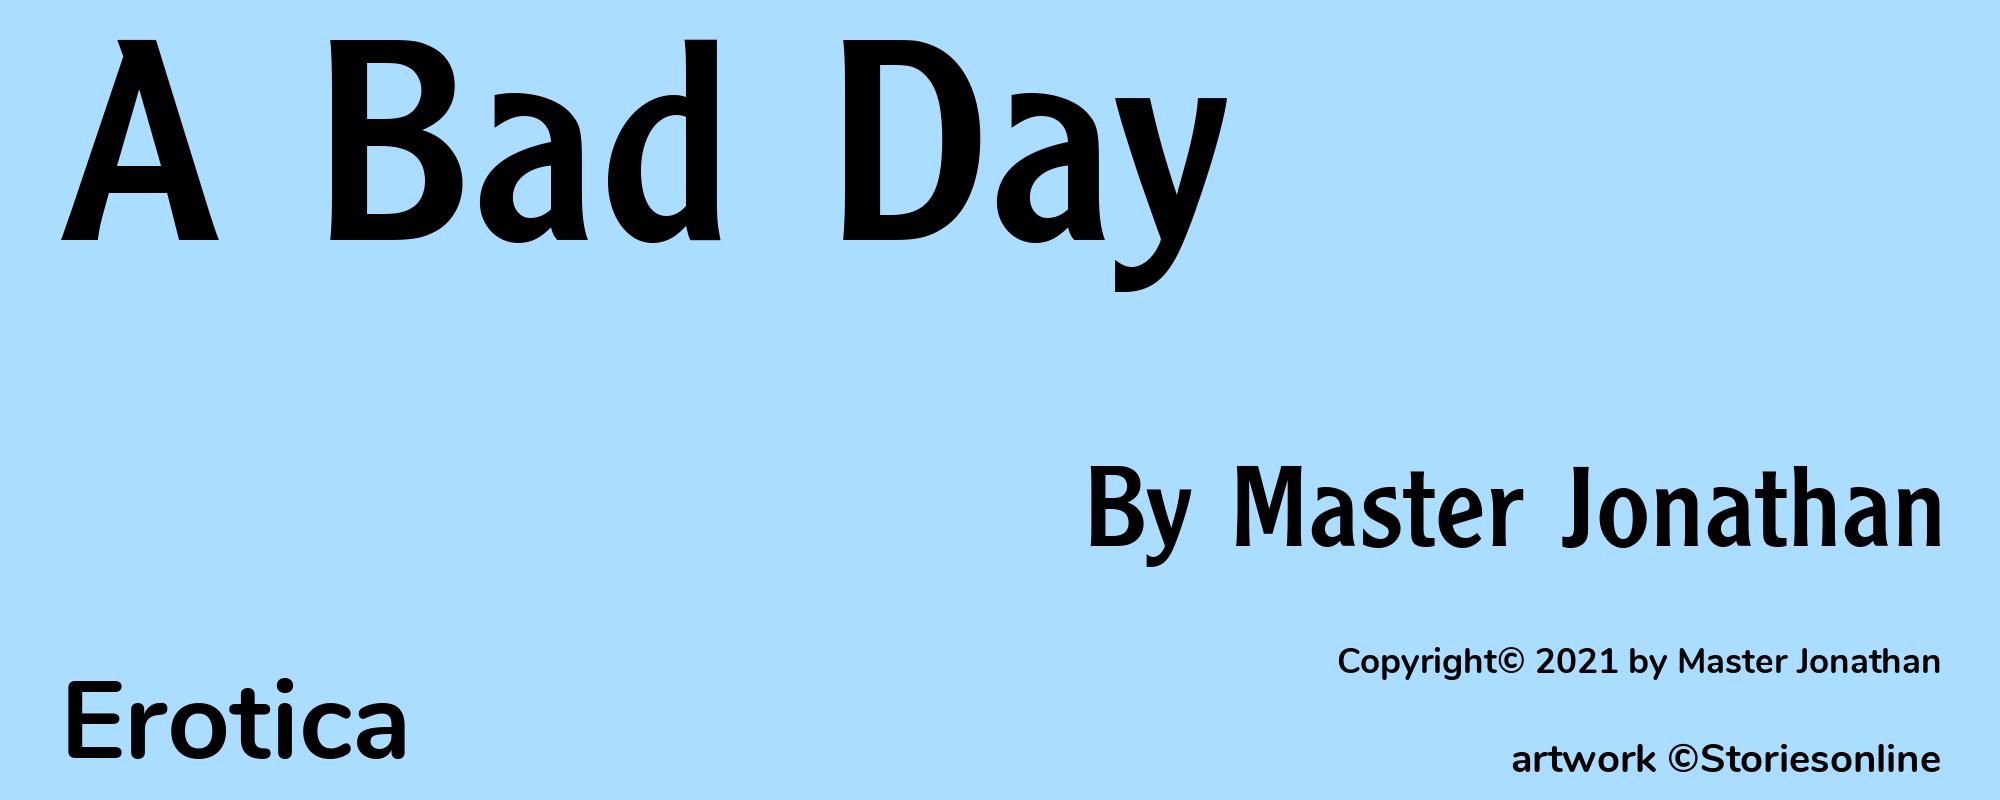 A Bad Day - Cover